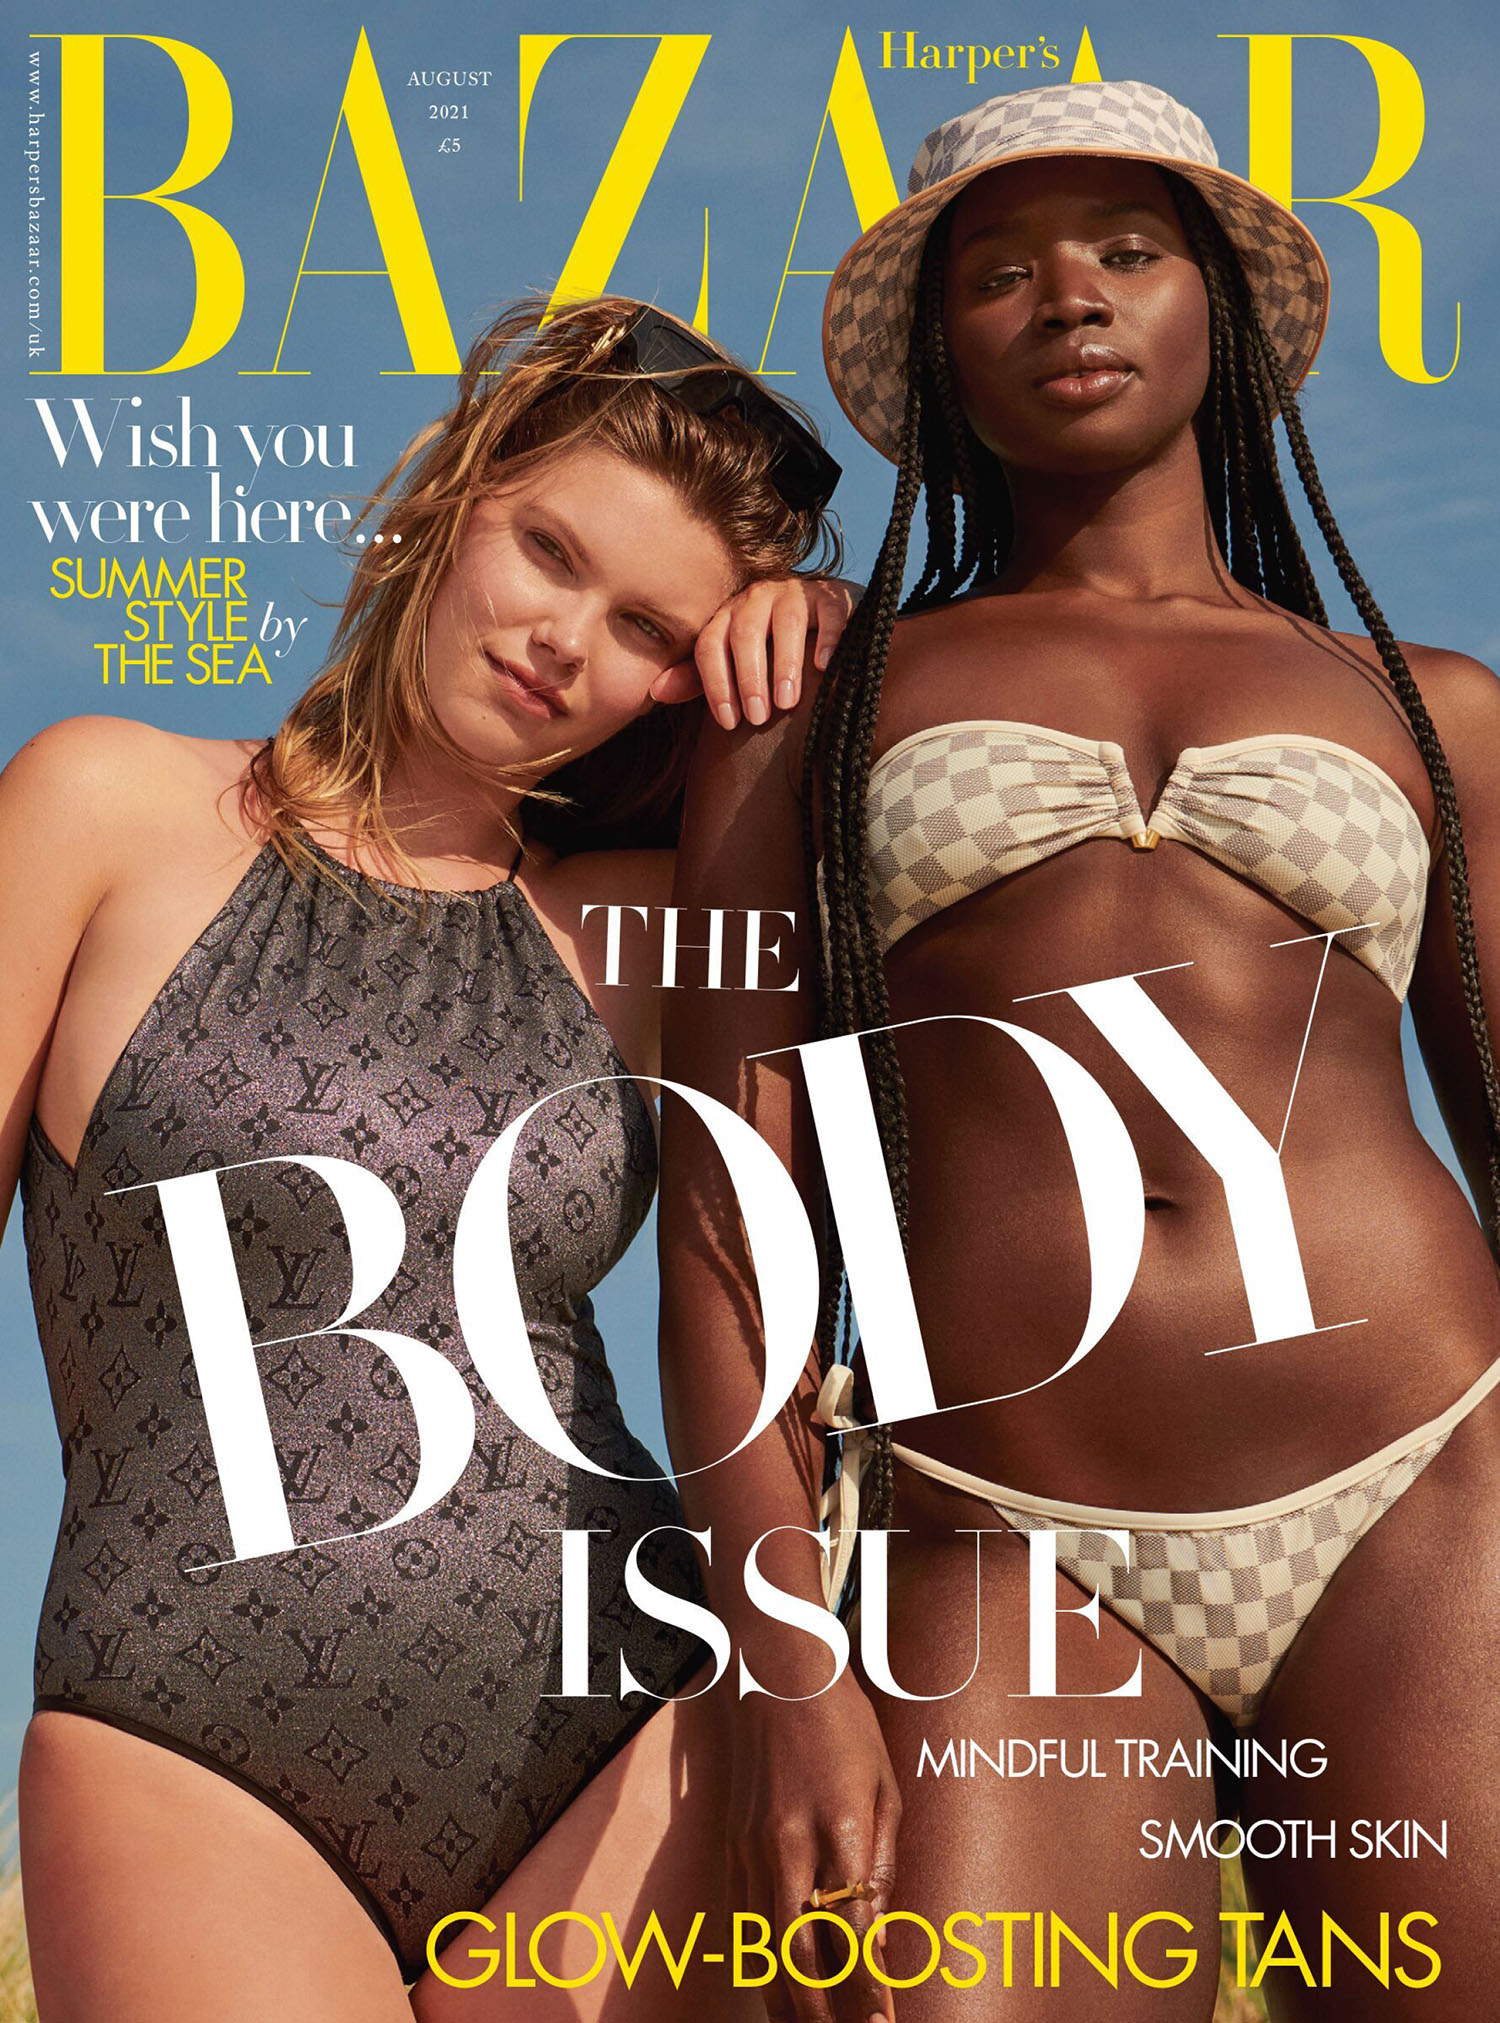 Seynabou Cisse and Molly Constable covers Harper’s Bazaar UK August 2021 by Pamela Hanson